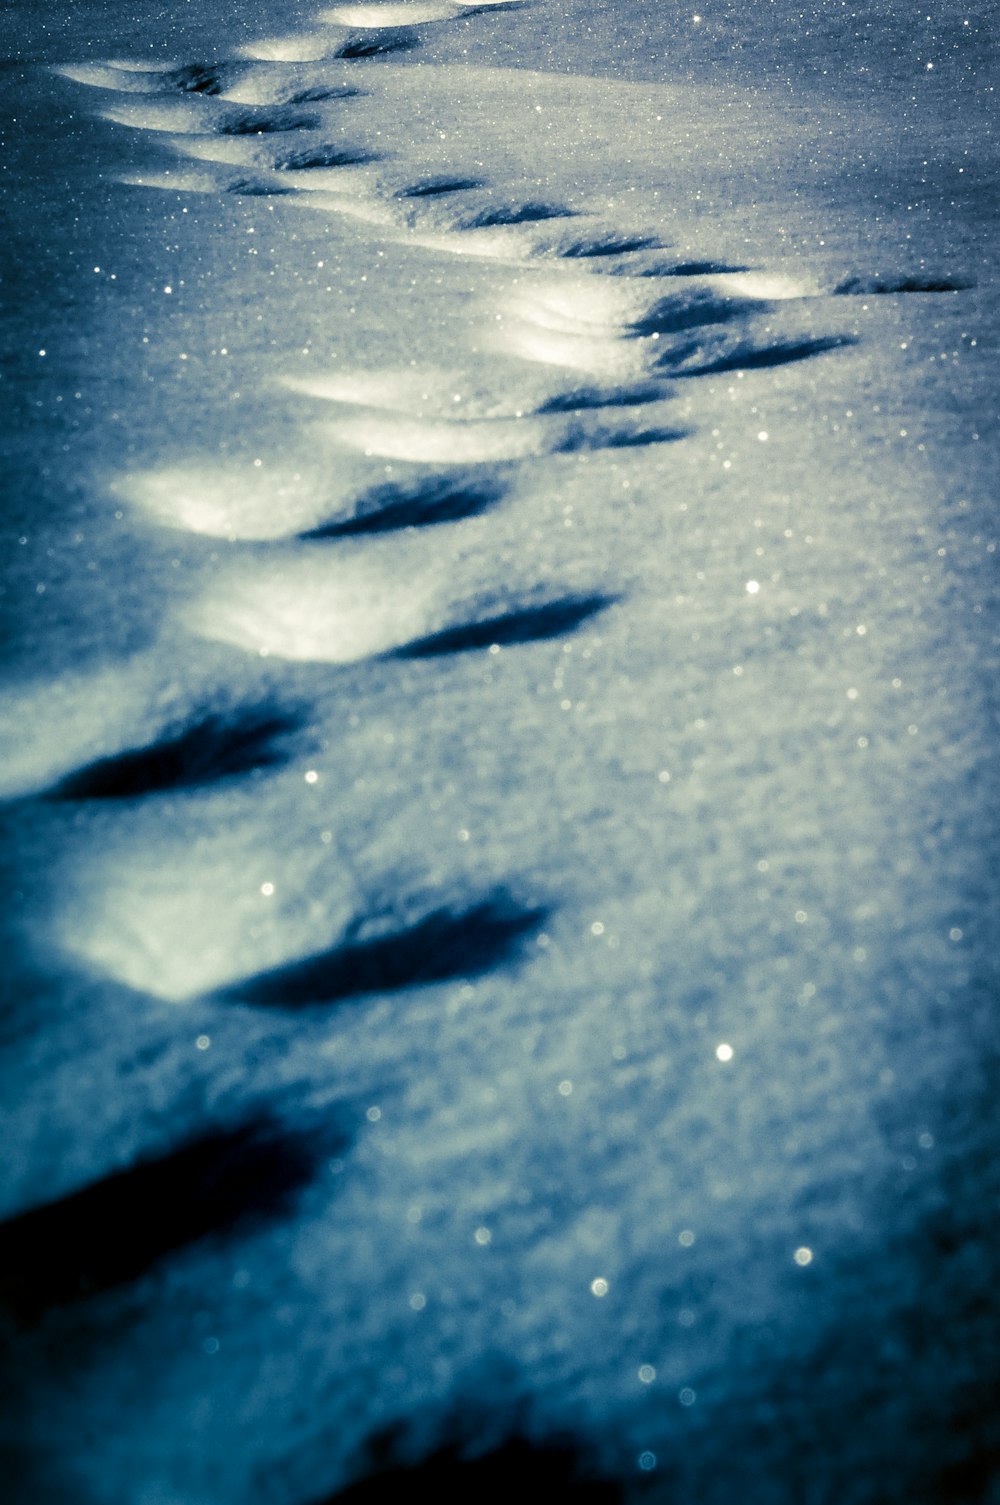 a long line of footprints in the snow